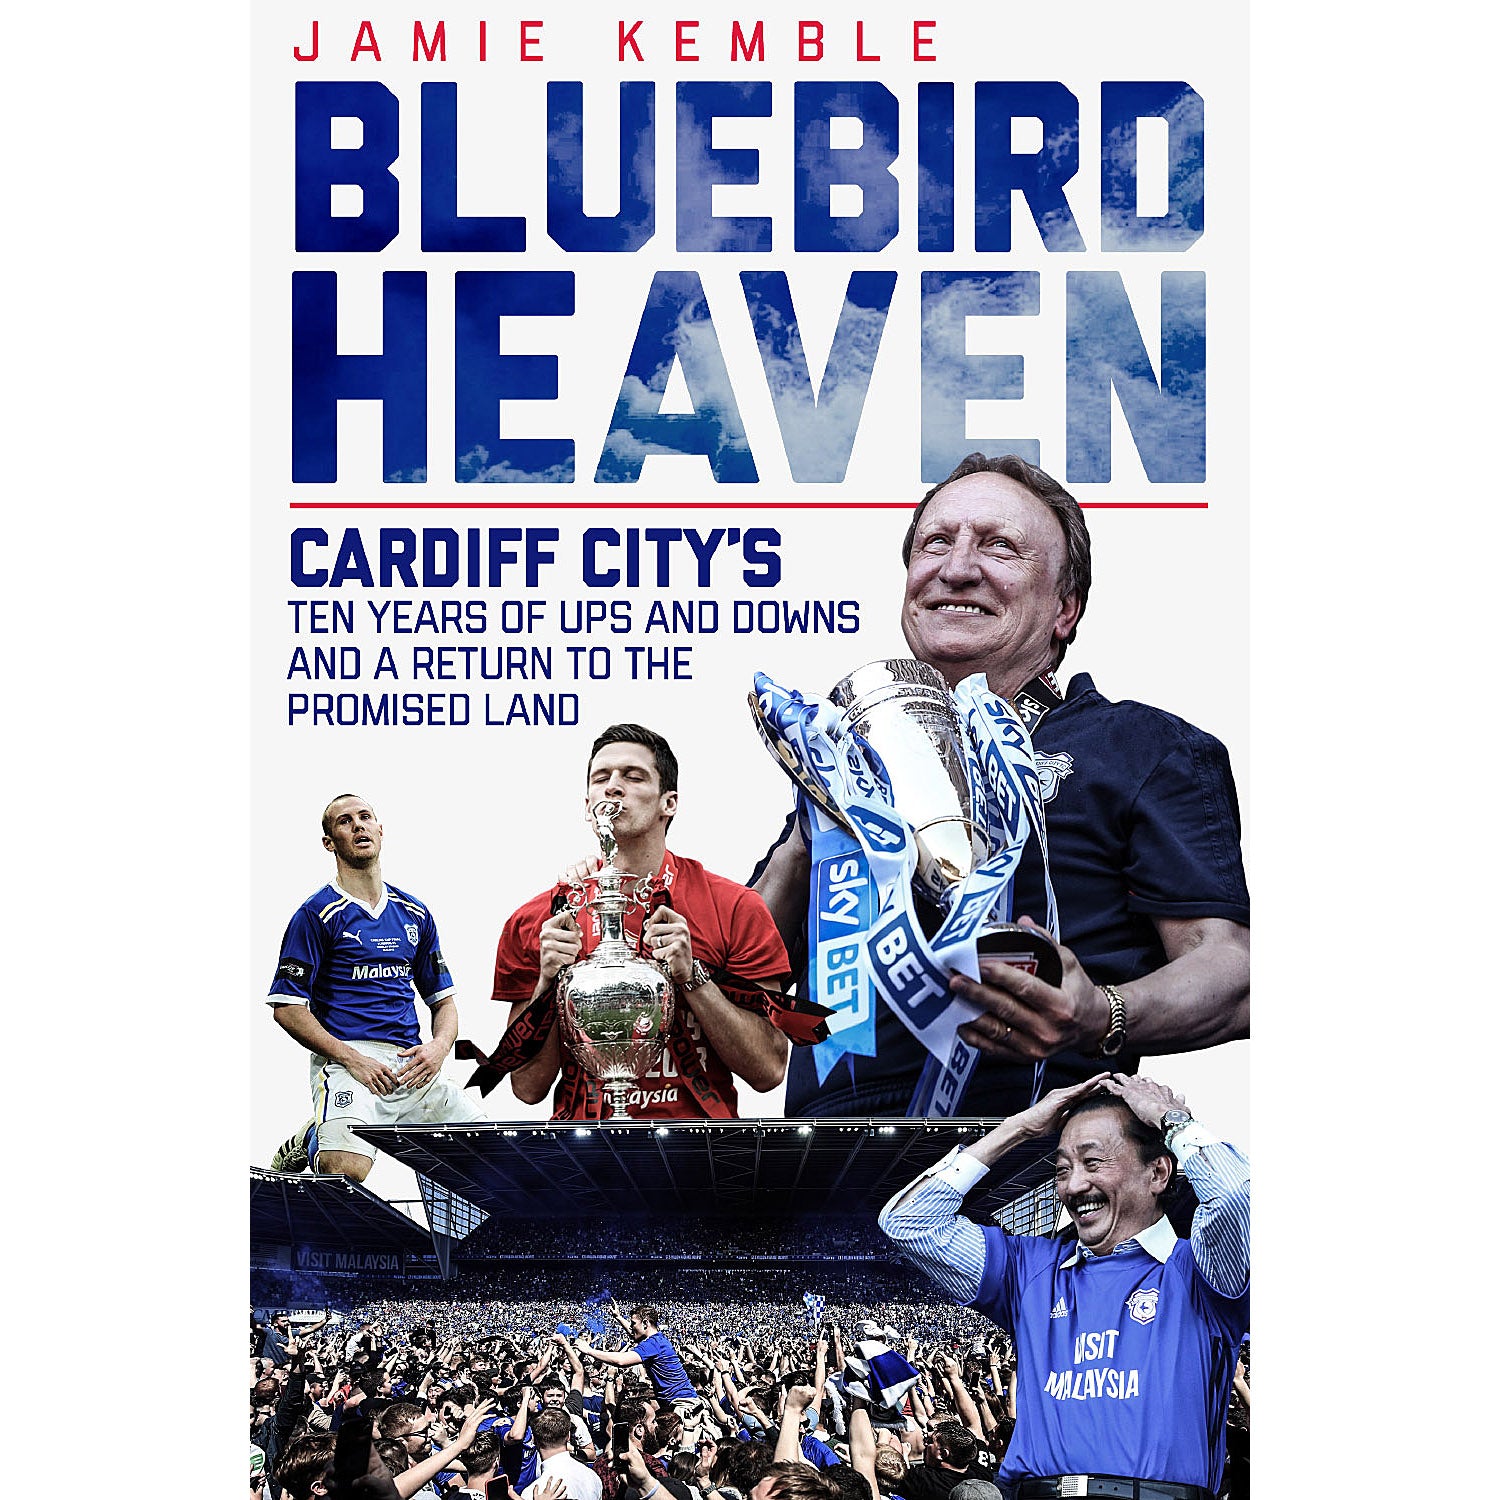 Bluebird Heaven – Cardiff City's Ten Years of Ups and Downs and a Return to the Promised Land